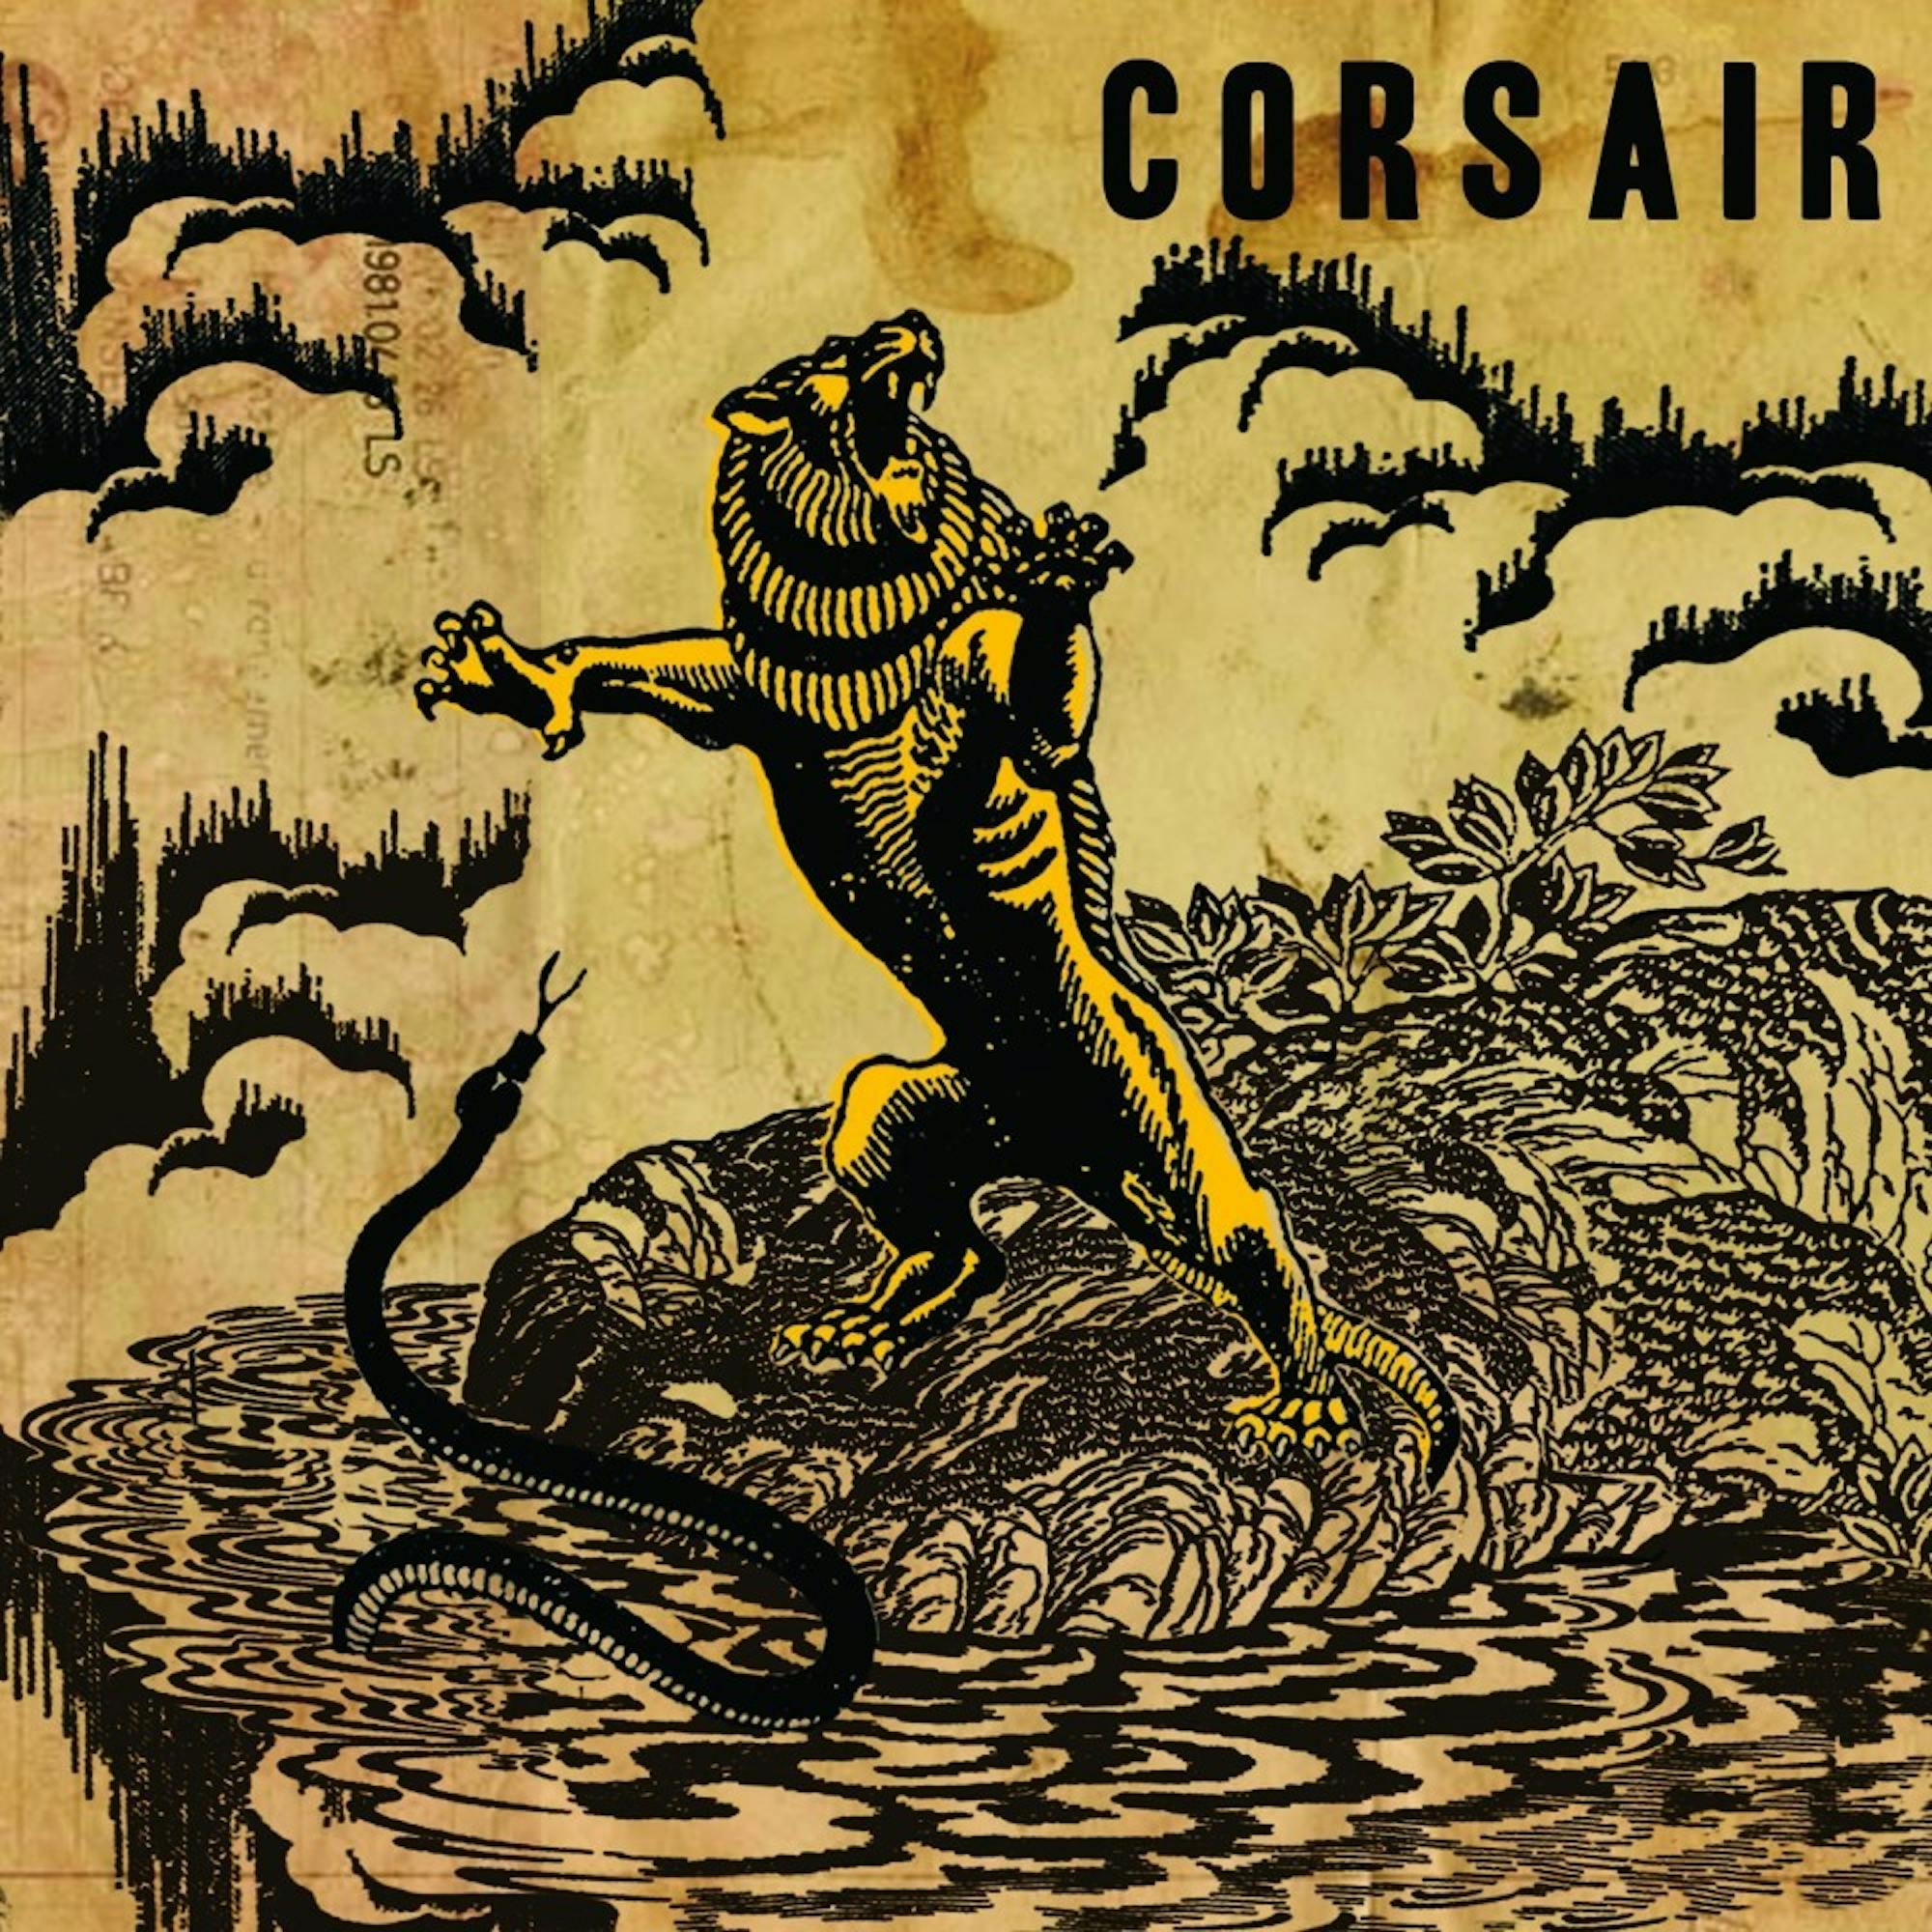 	Virginia-based Corsair’s newest album is better than expected, and serves as a powerful heavy metal album.